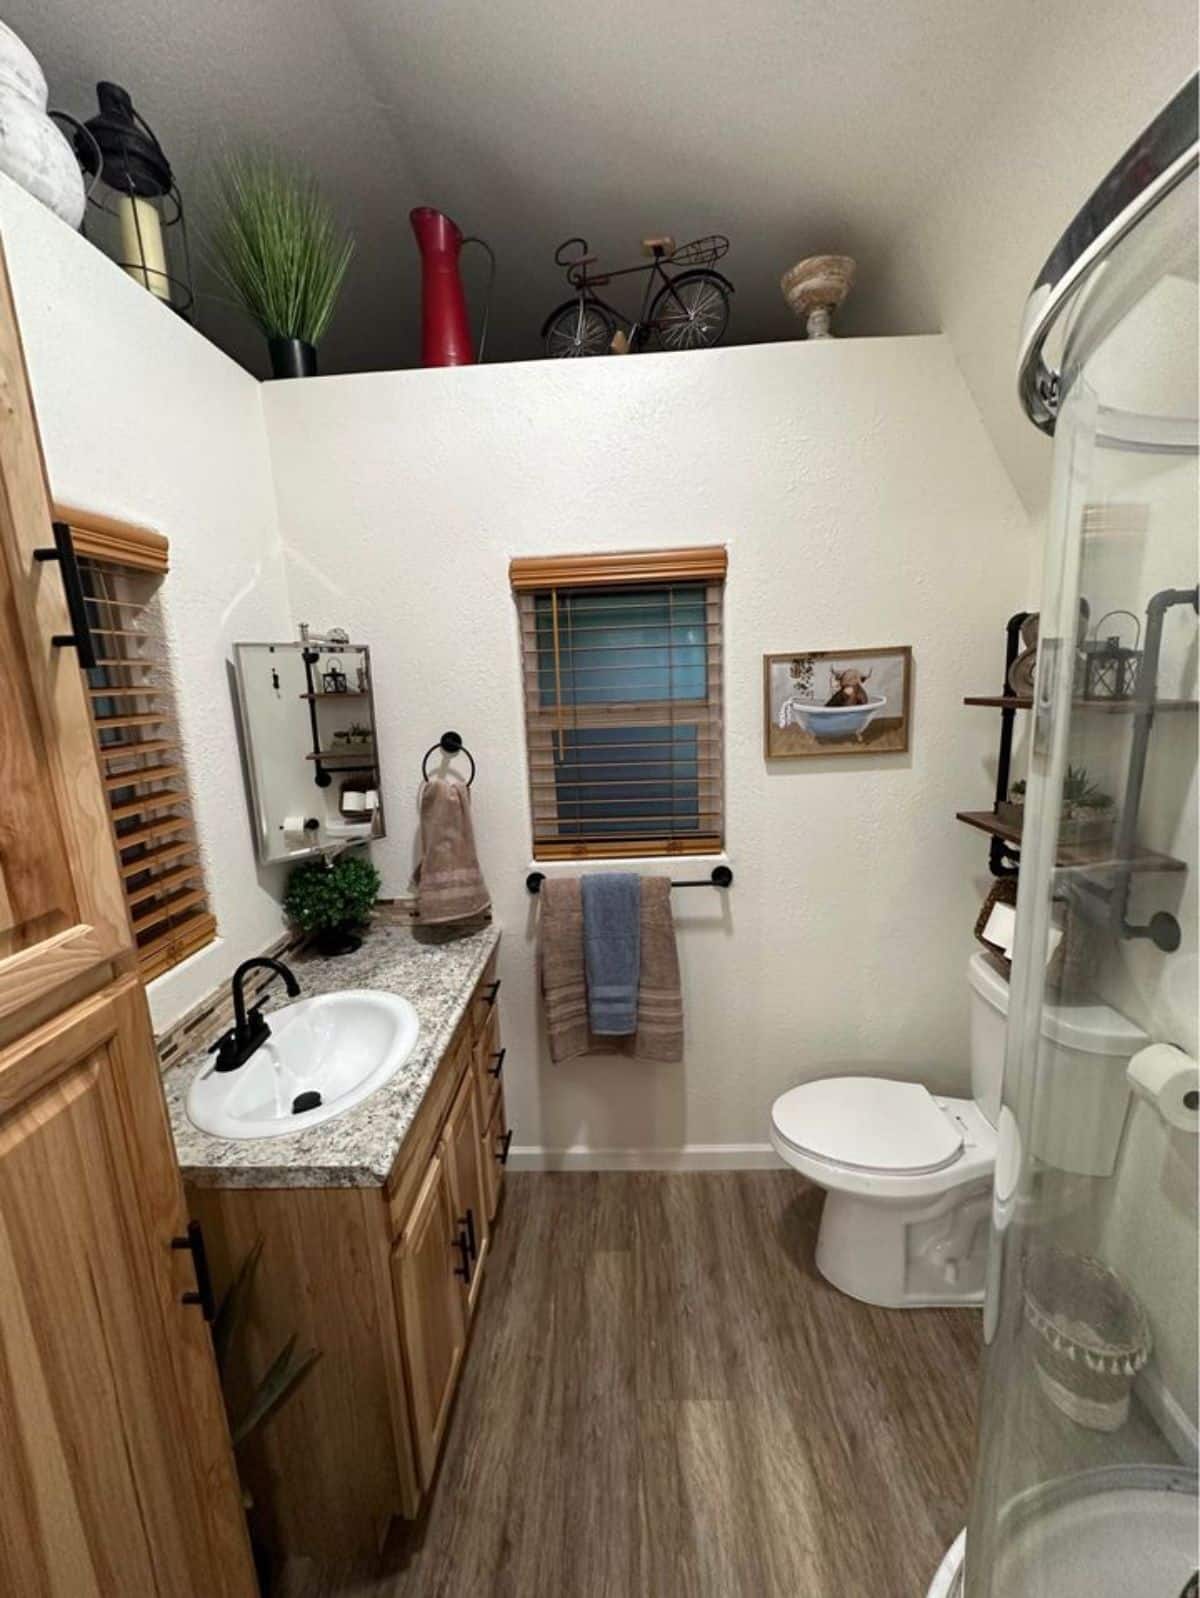 bathroom of 32’ tiny house has all the standard fittings with separate shower with glass enclosure